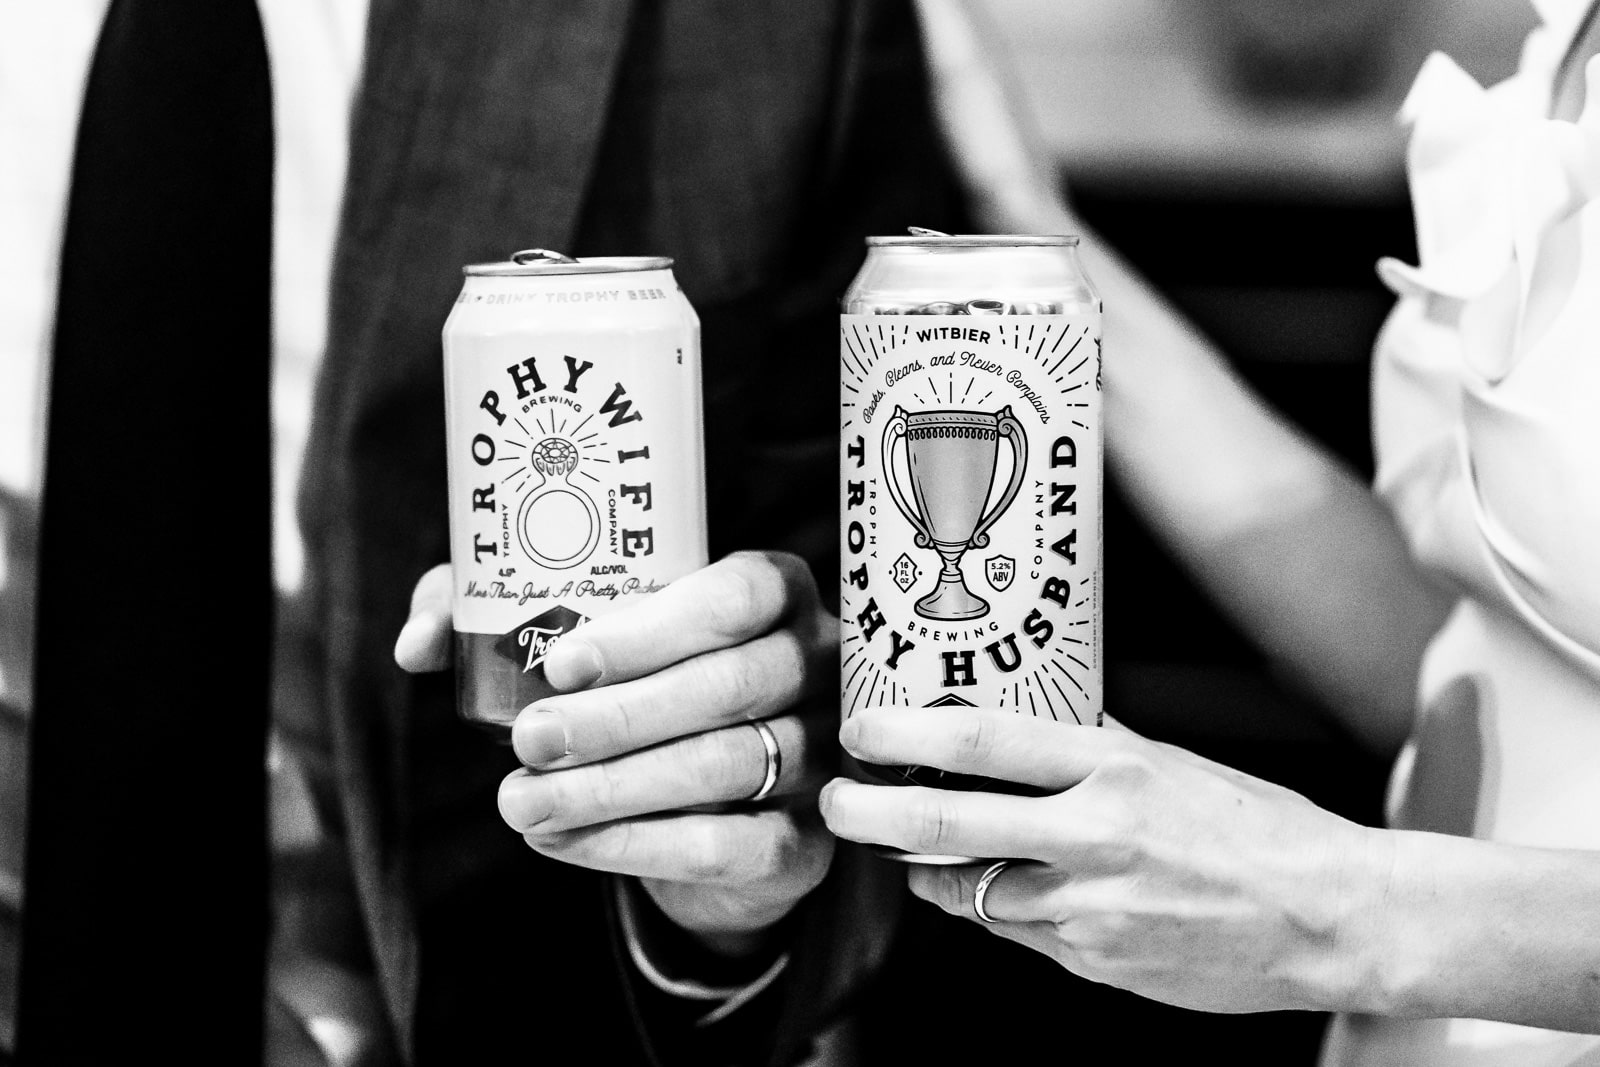 two hands with wedding rings hold beer cans; one says Trophy husband, the other says Trophy wife